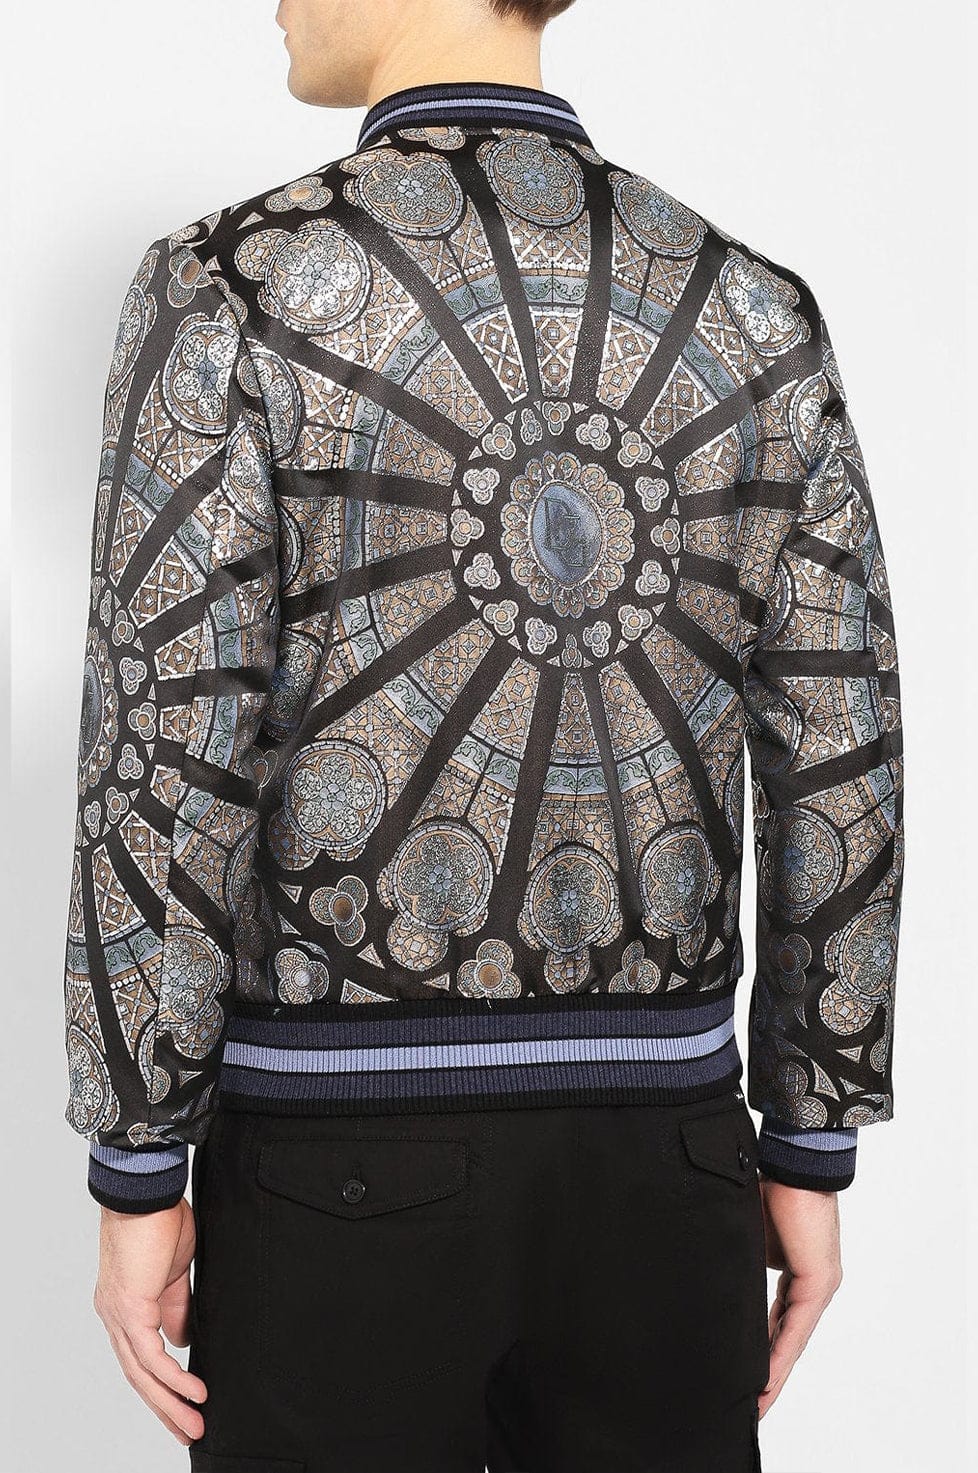 Dolce & Gabbana Stained Glass Window Style Print Bomber Jacket